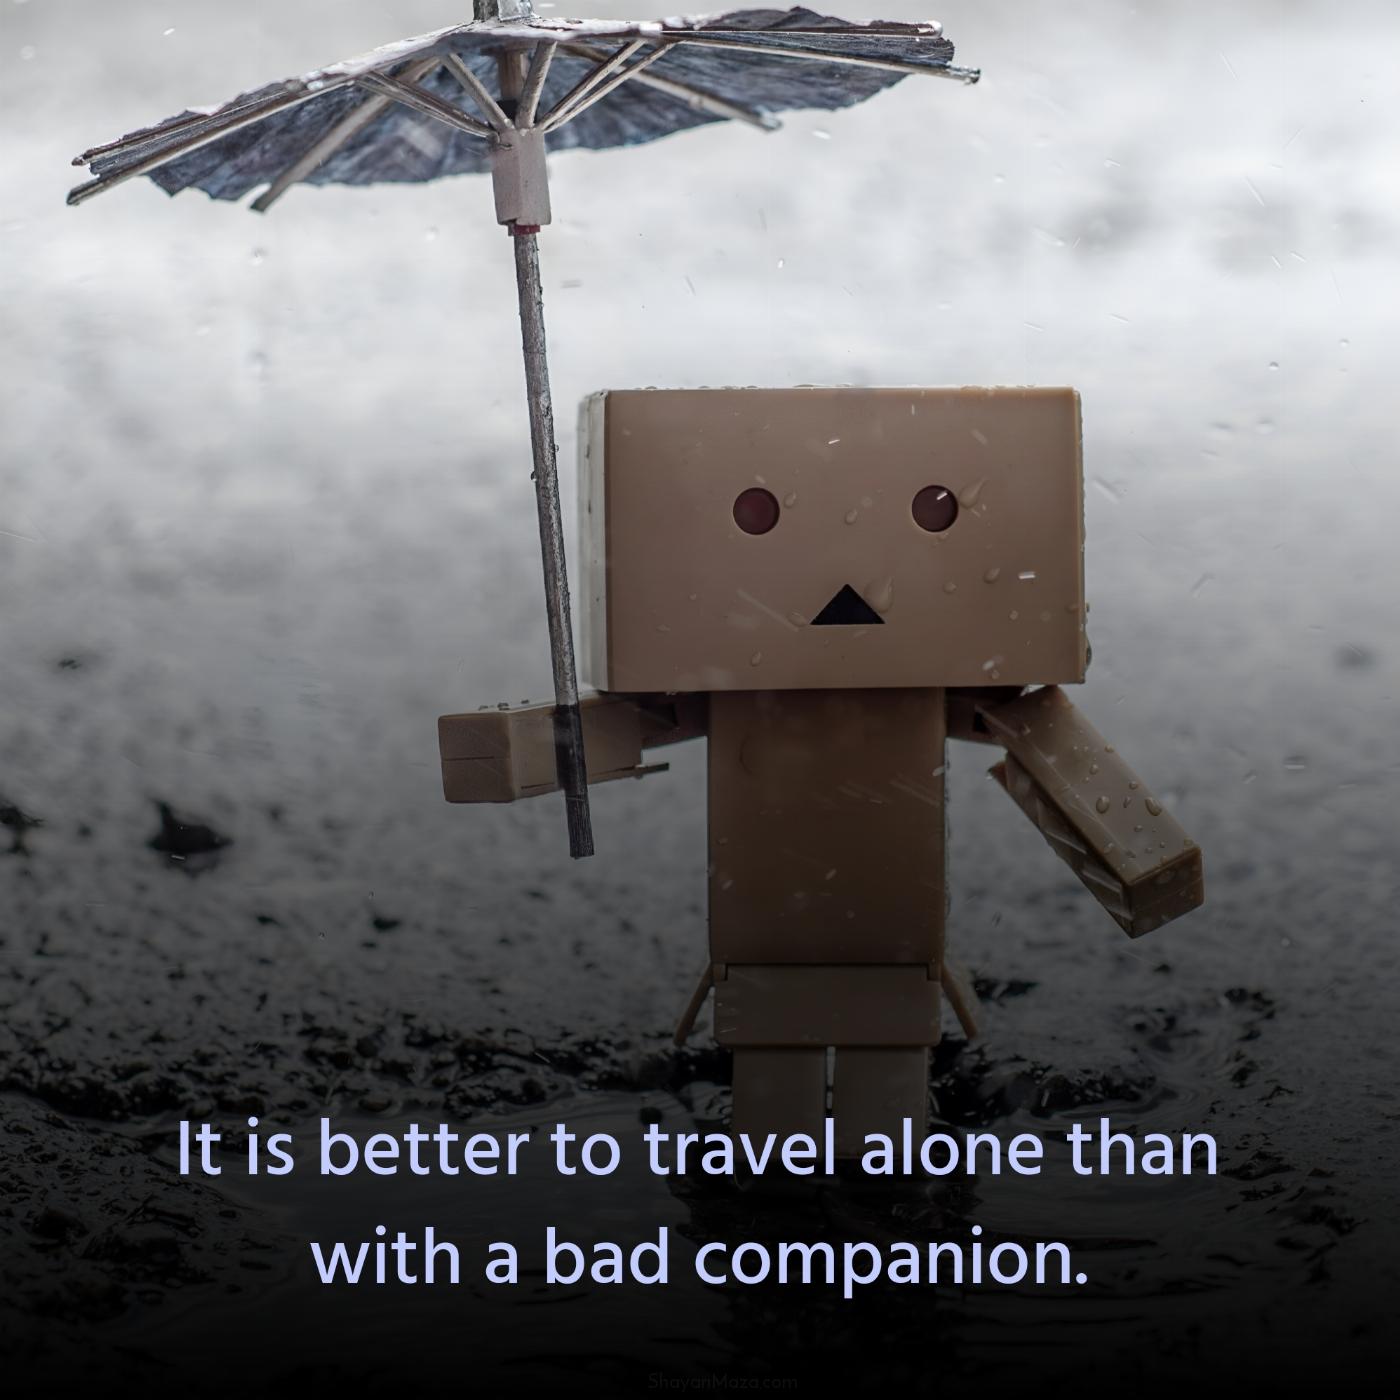 It is better to travel alone than with a bad companion